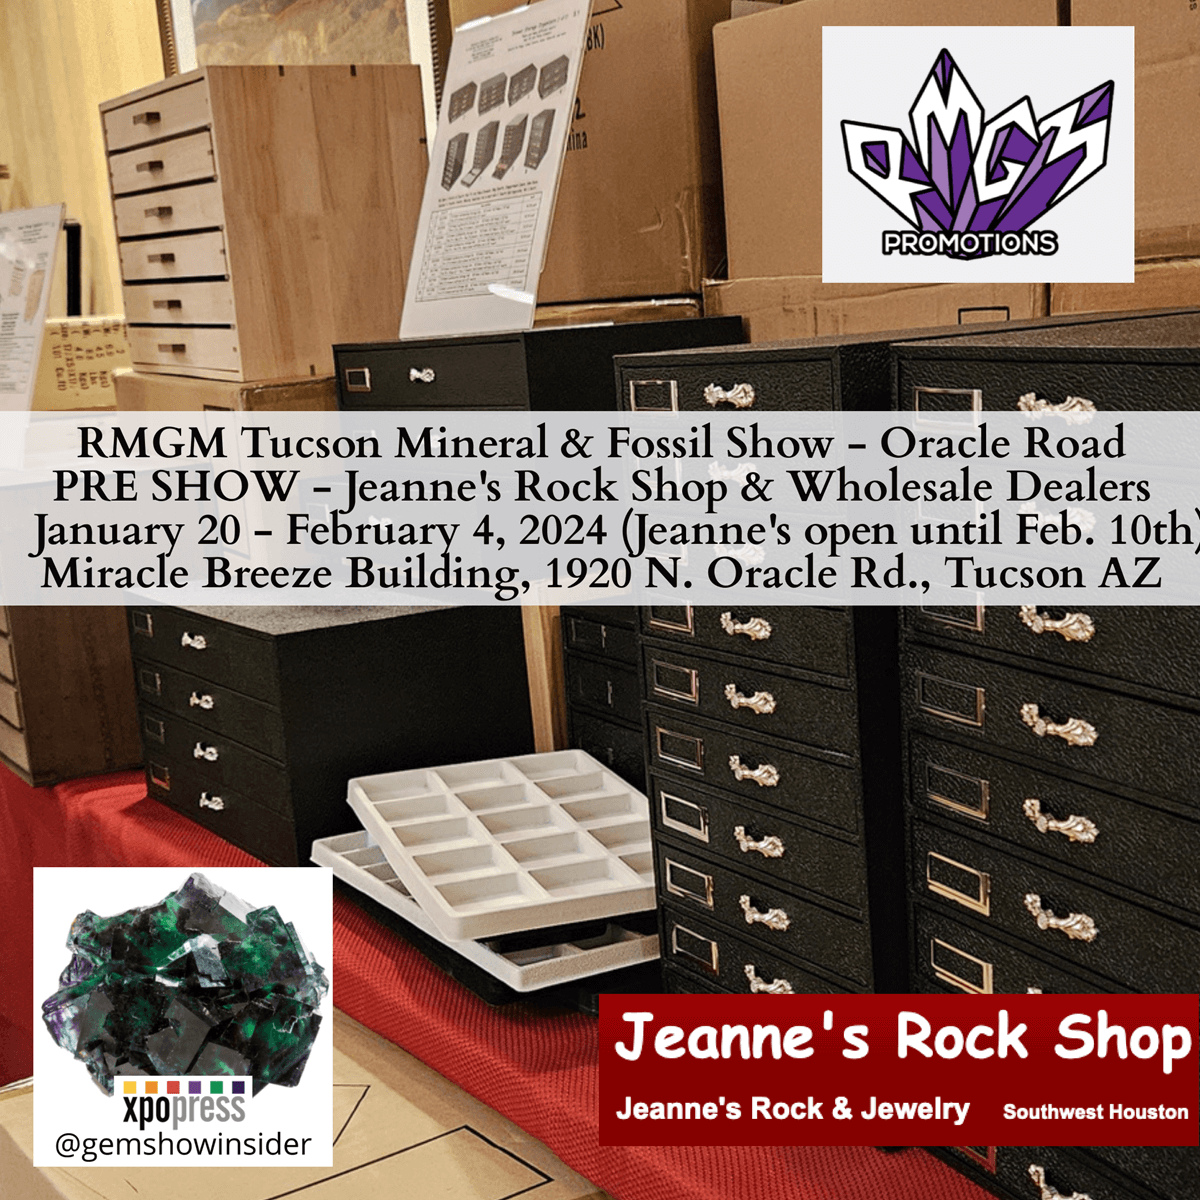 RMGM Tucson Mineral & Fossil Show - Oracle Road 2024